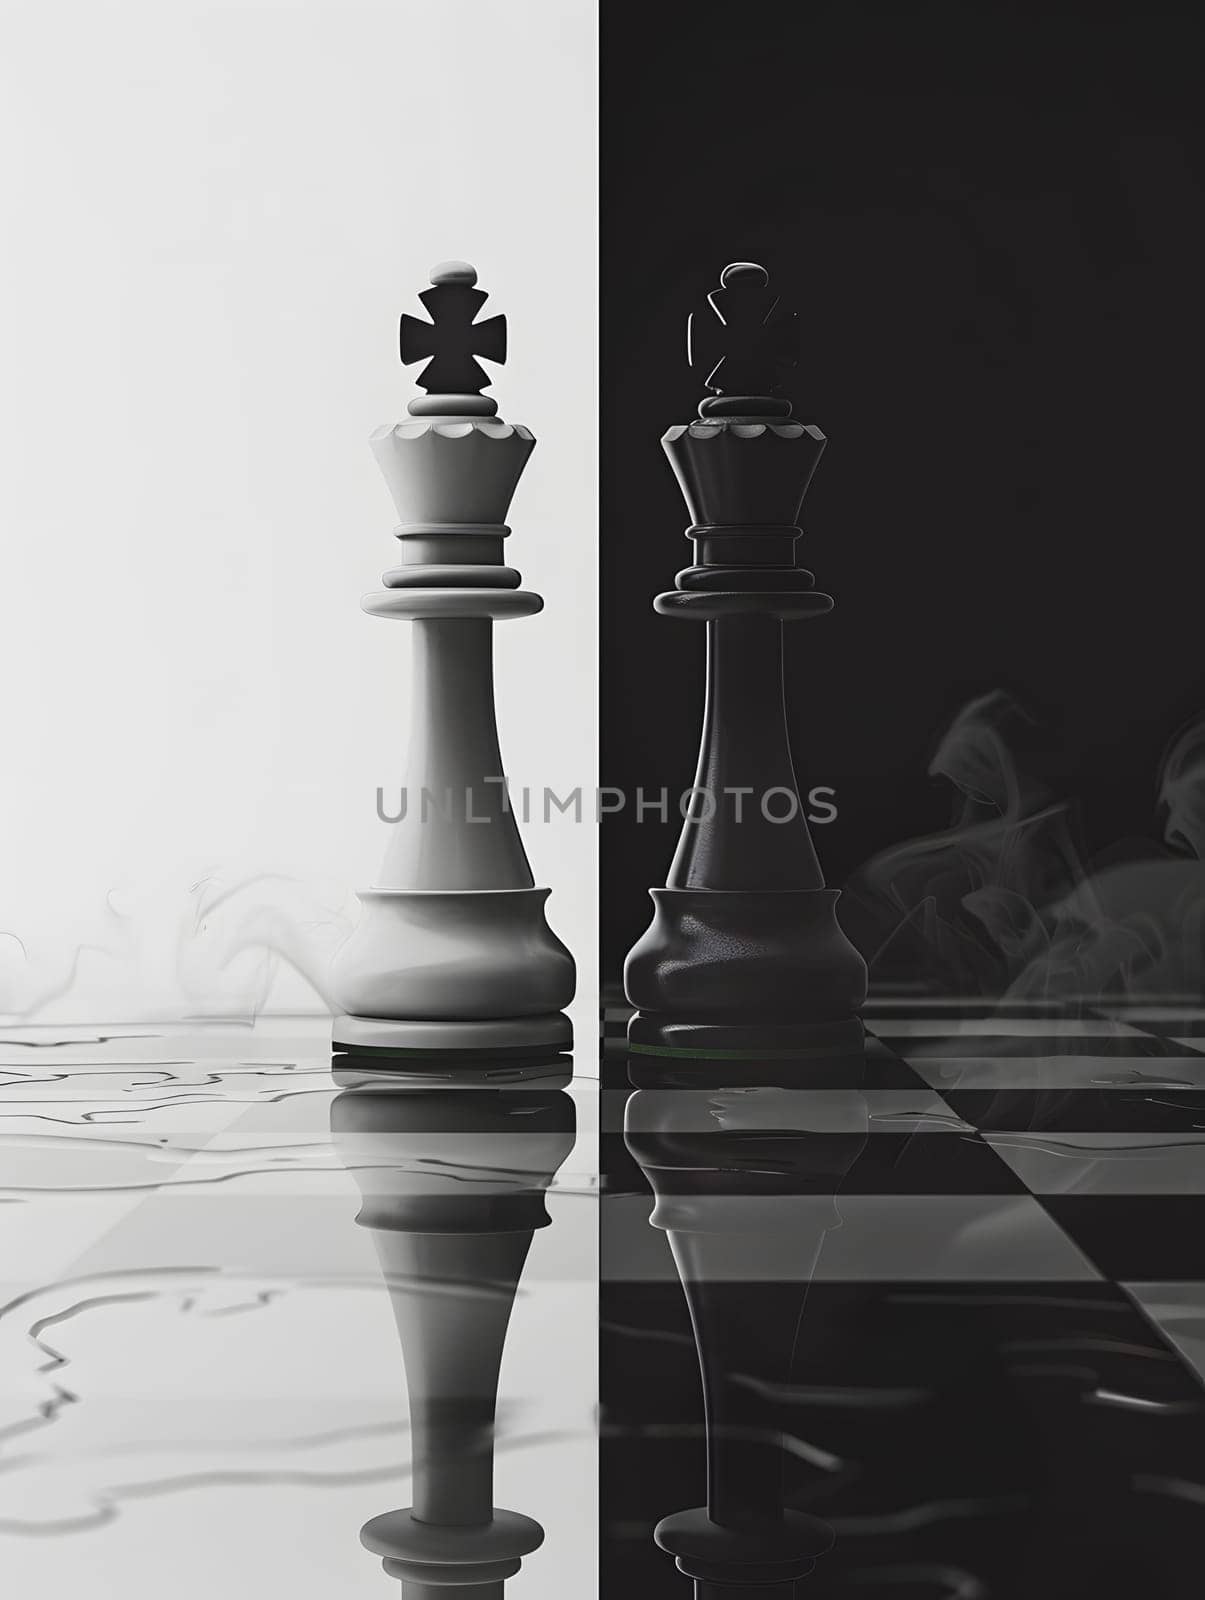 Chess pieces on a board game in black and white photo by Nadtochiy